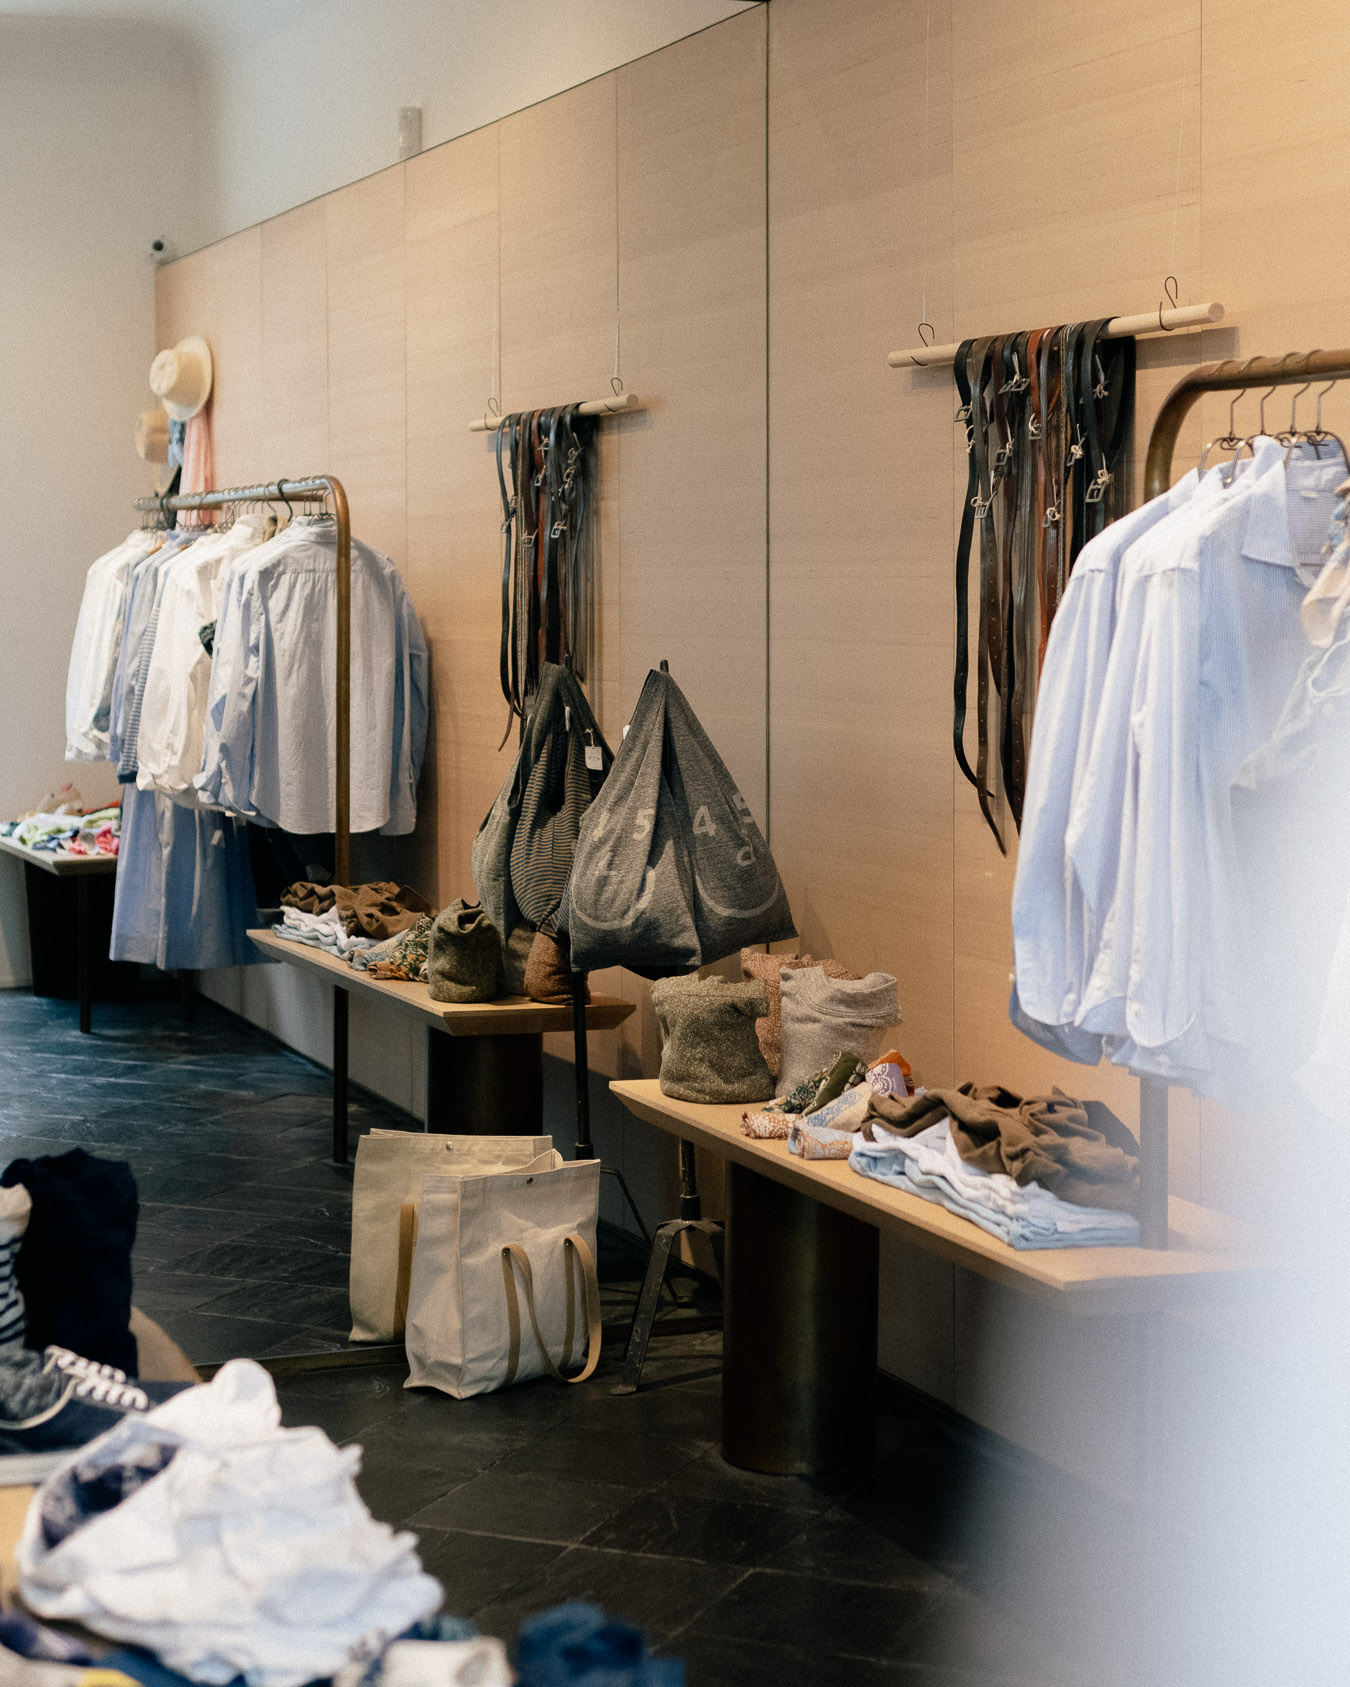 Introduce yourself to some of the best menswear shops in Tokyo